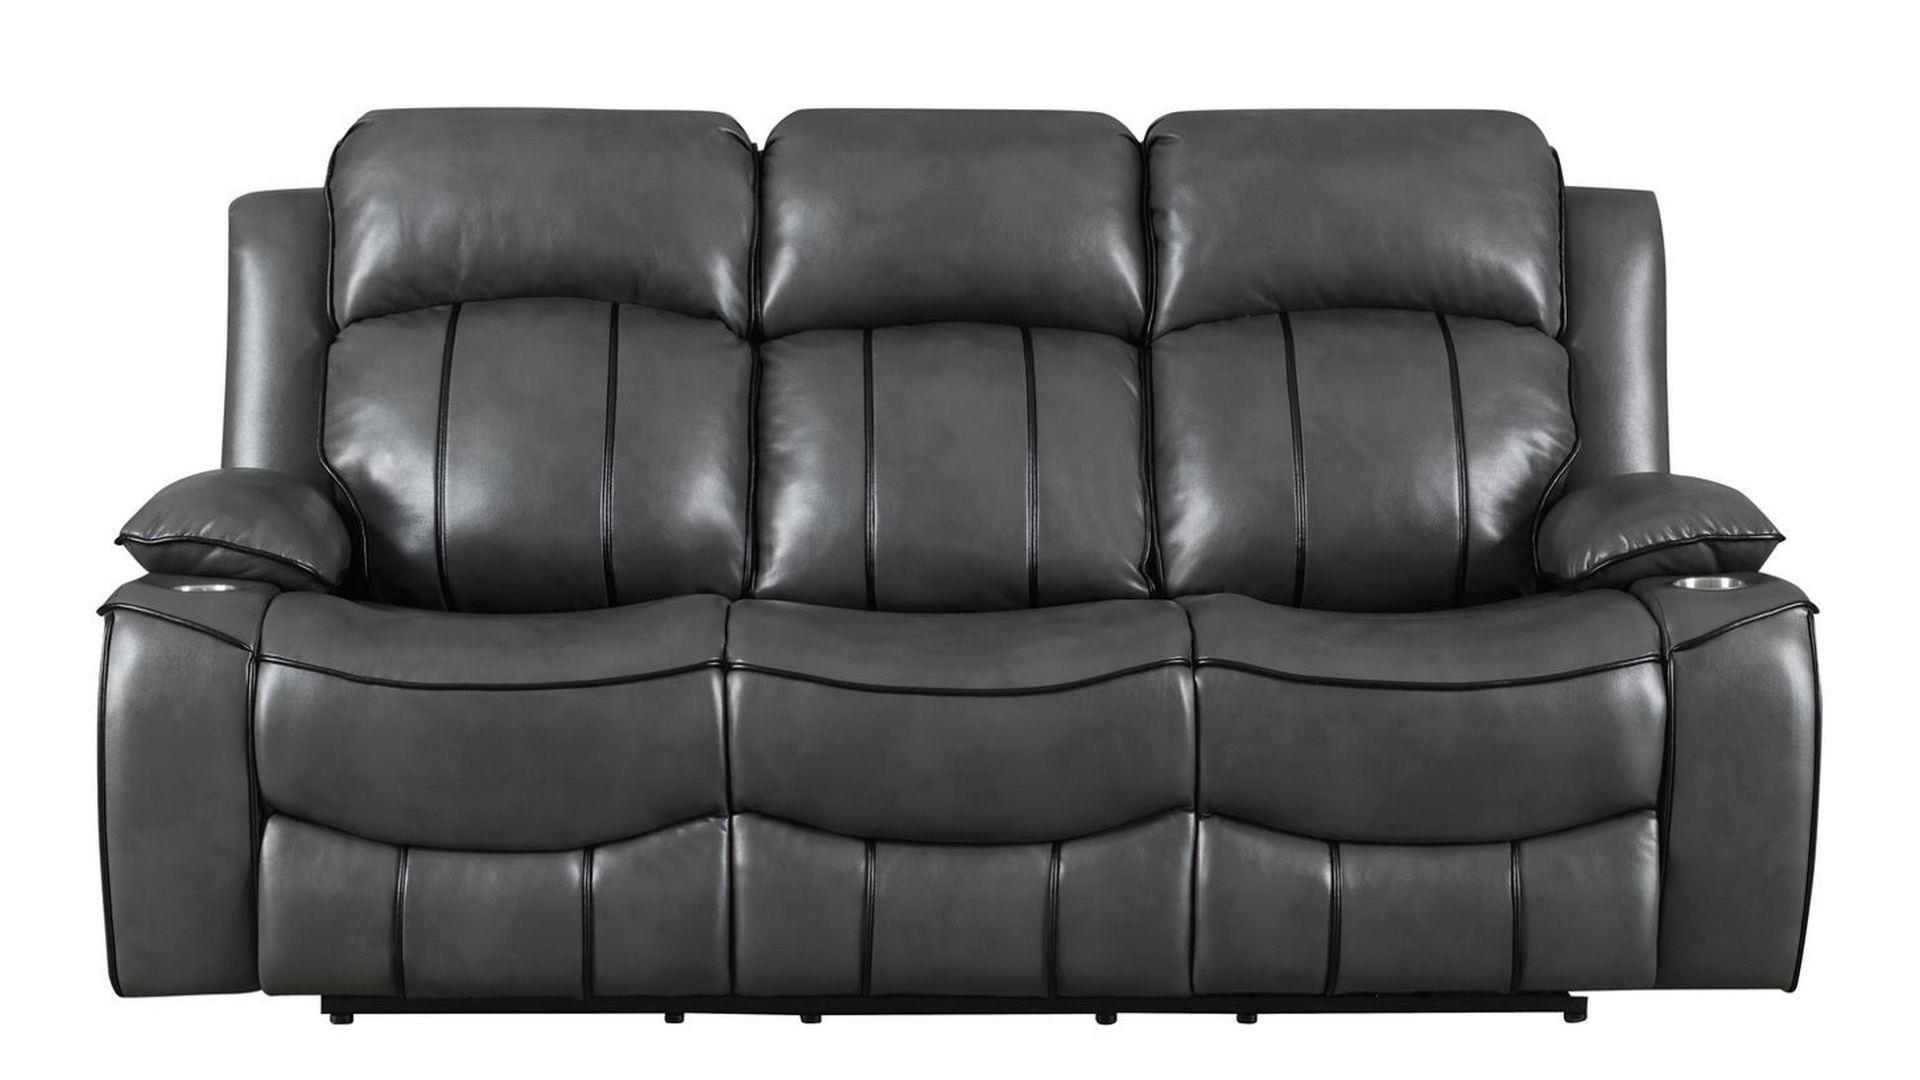 Transitional Power Reclining Sofa U3120 CHARCOAL GREY U3120-DTP672-7 GREY W/DTP672-14 BLK WELTS-PRS in Gray Faux Leather